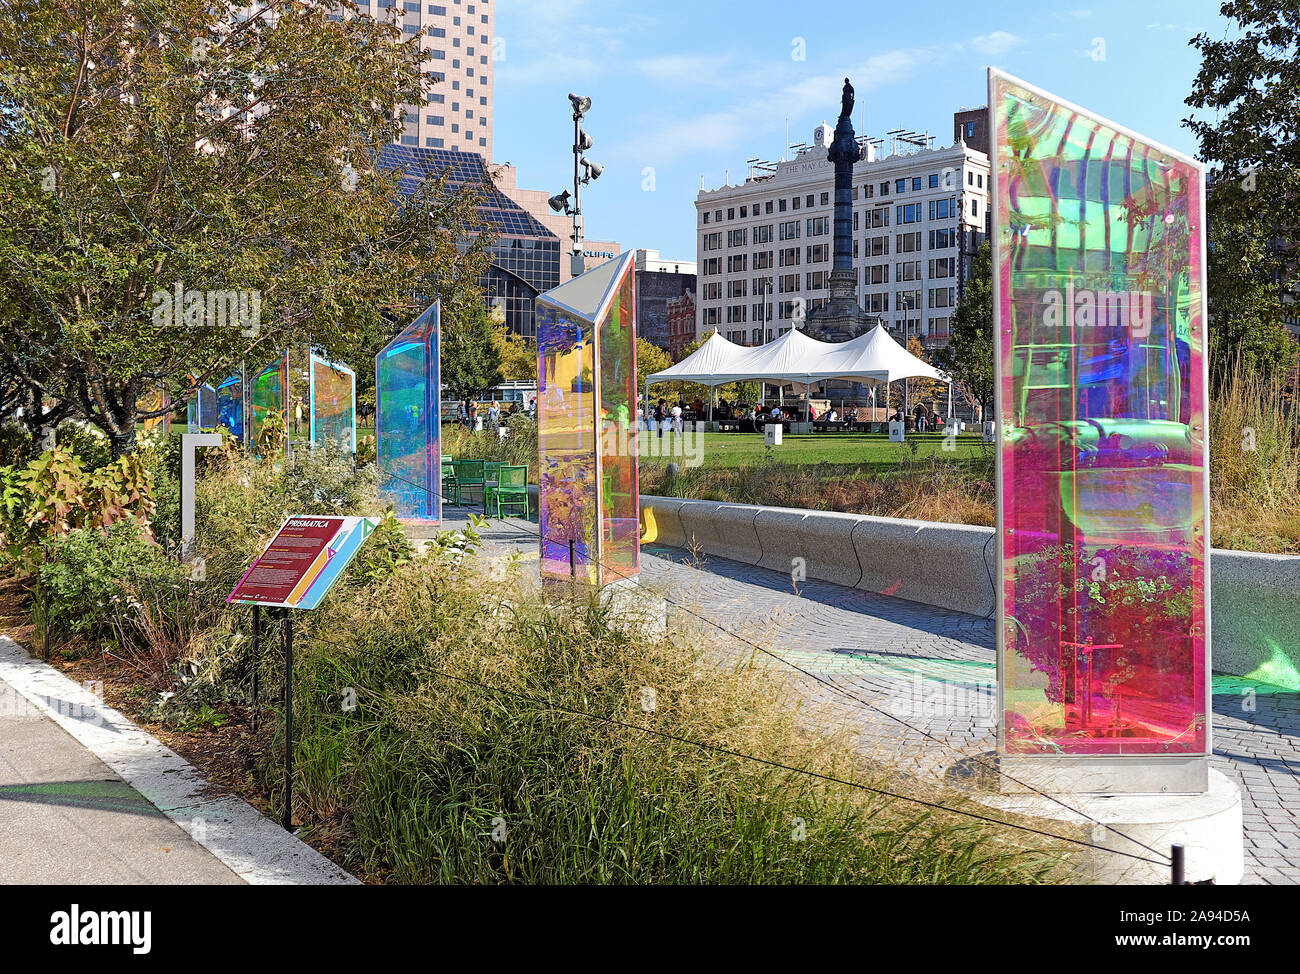 Outdoor prismatica art installation on Public Square in downtown Cleveland, Ohio, USA by Raw Design of Toronto, Canada. Stock Photo